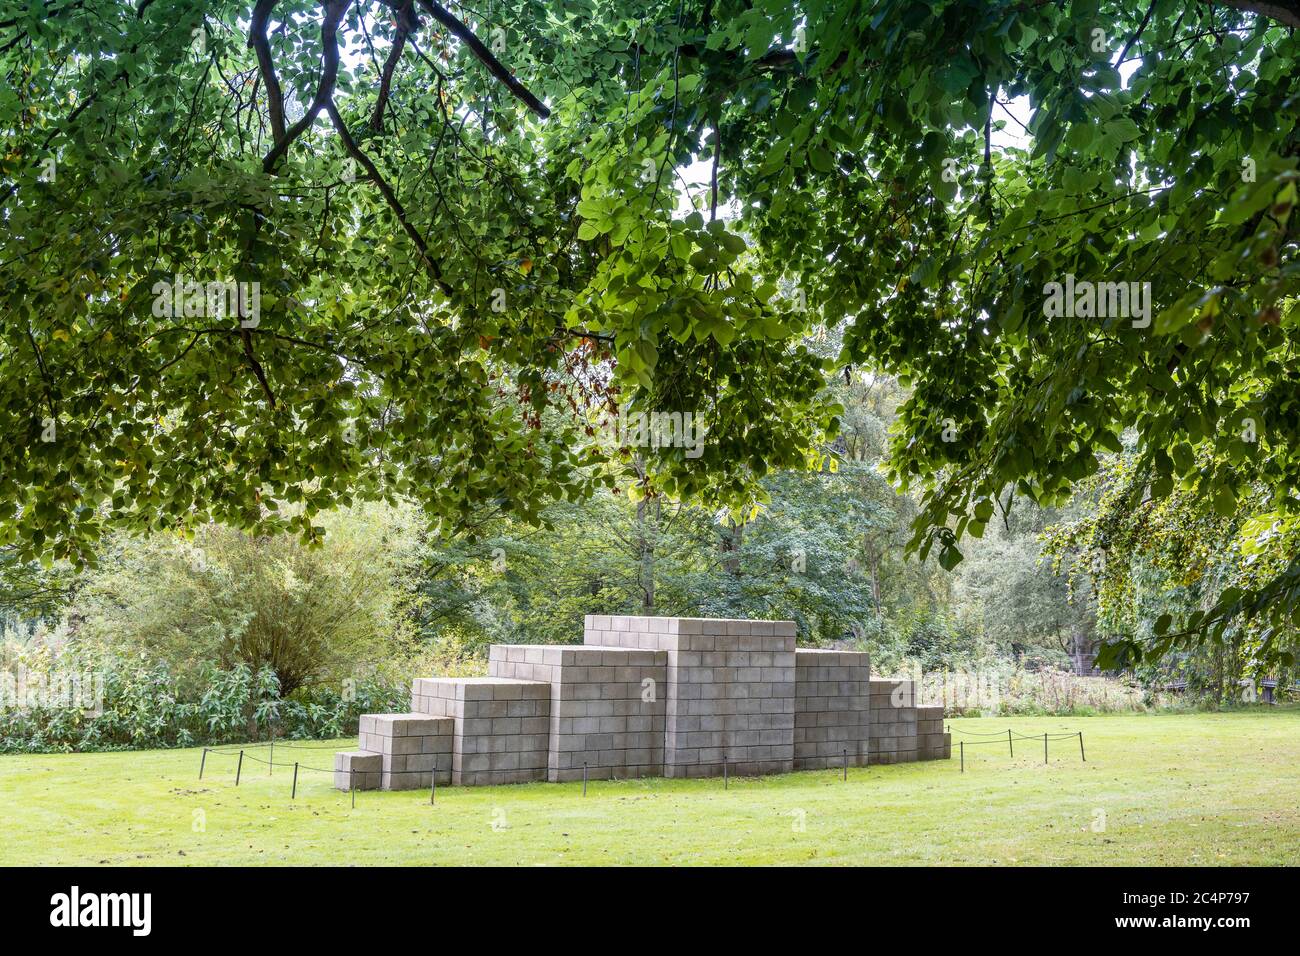 Geometric sculpture by Sol Lewitt: 123454321 showcased in Yorkshire Sculpture Park near Wakefield, England. Stock Photo